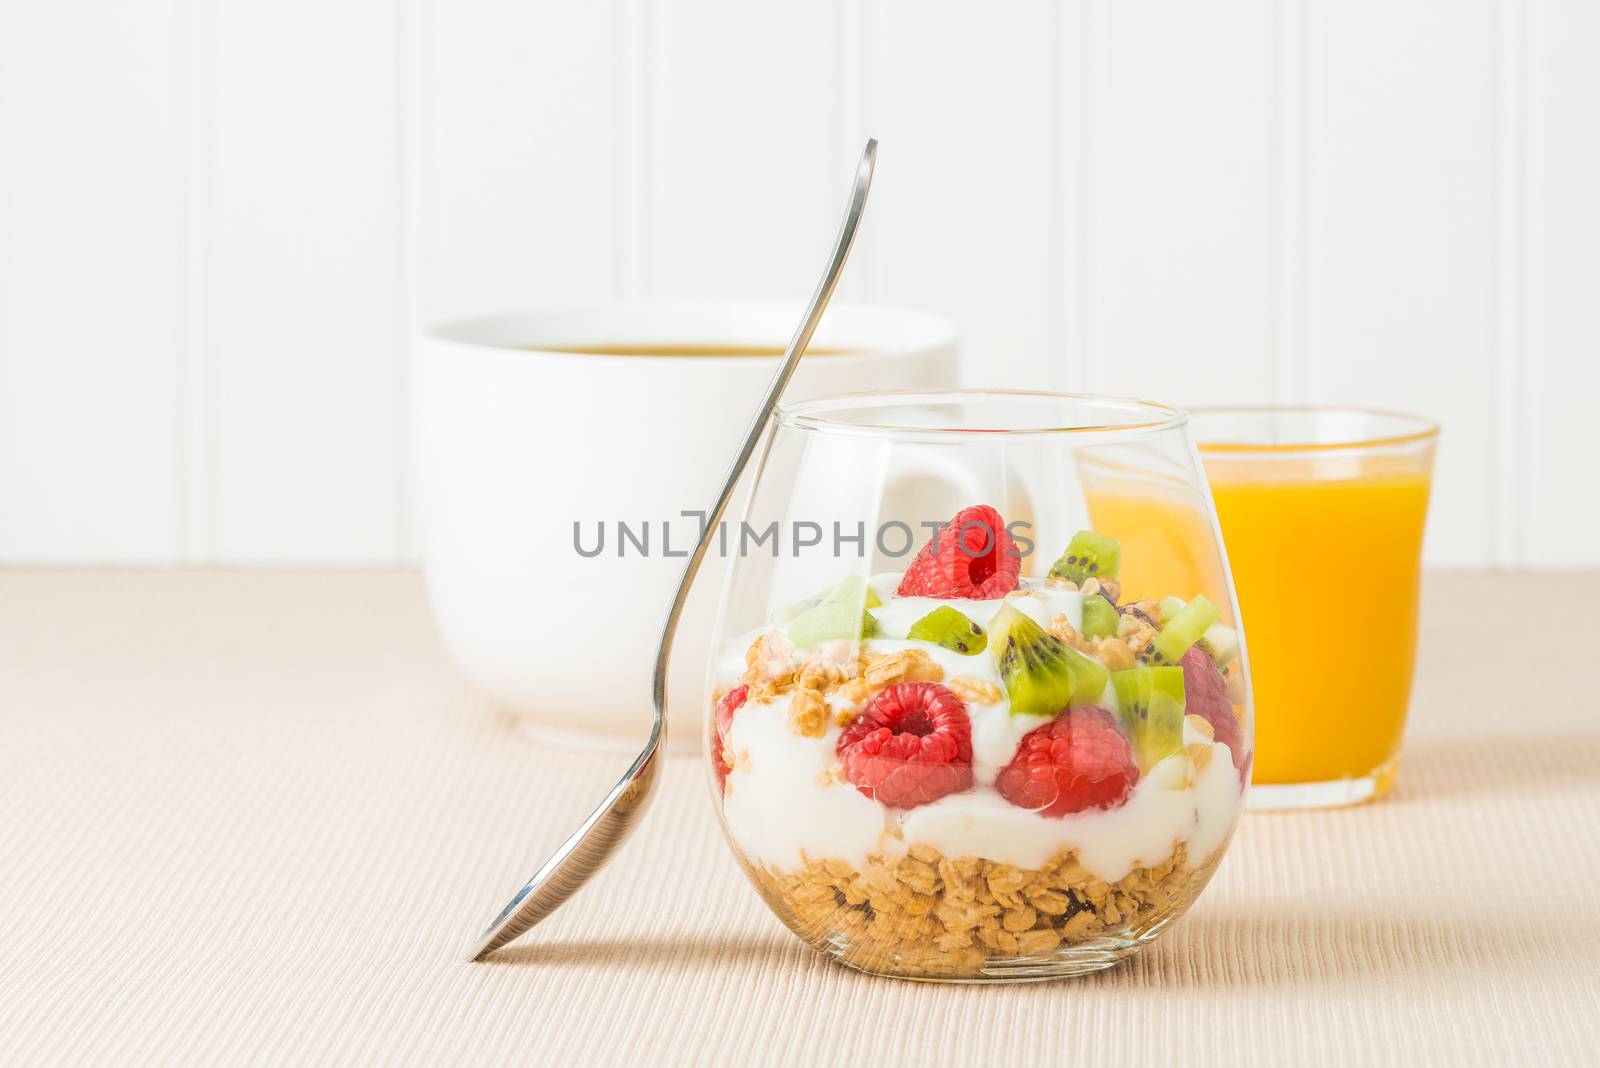 Delicious fruit and yogurt parfait served with coffee and juice.